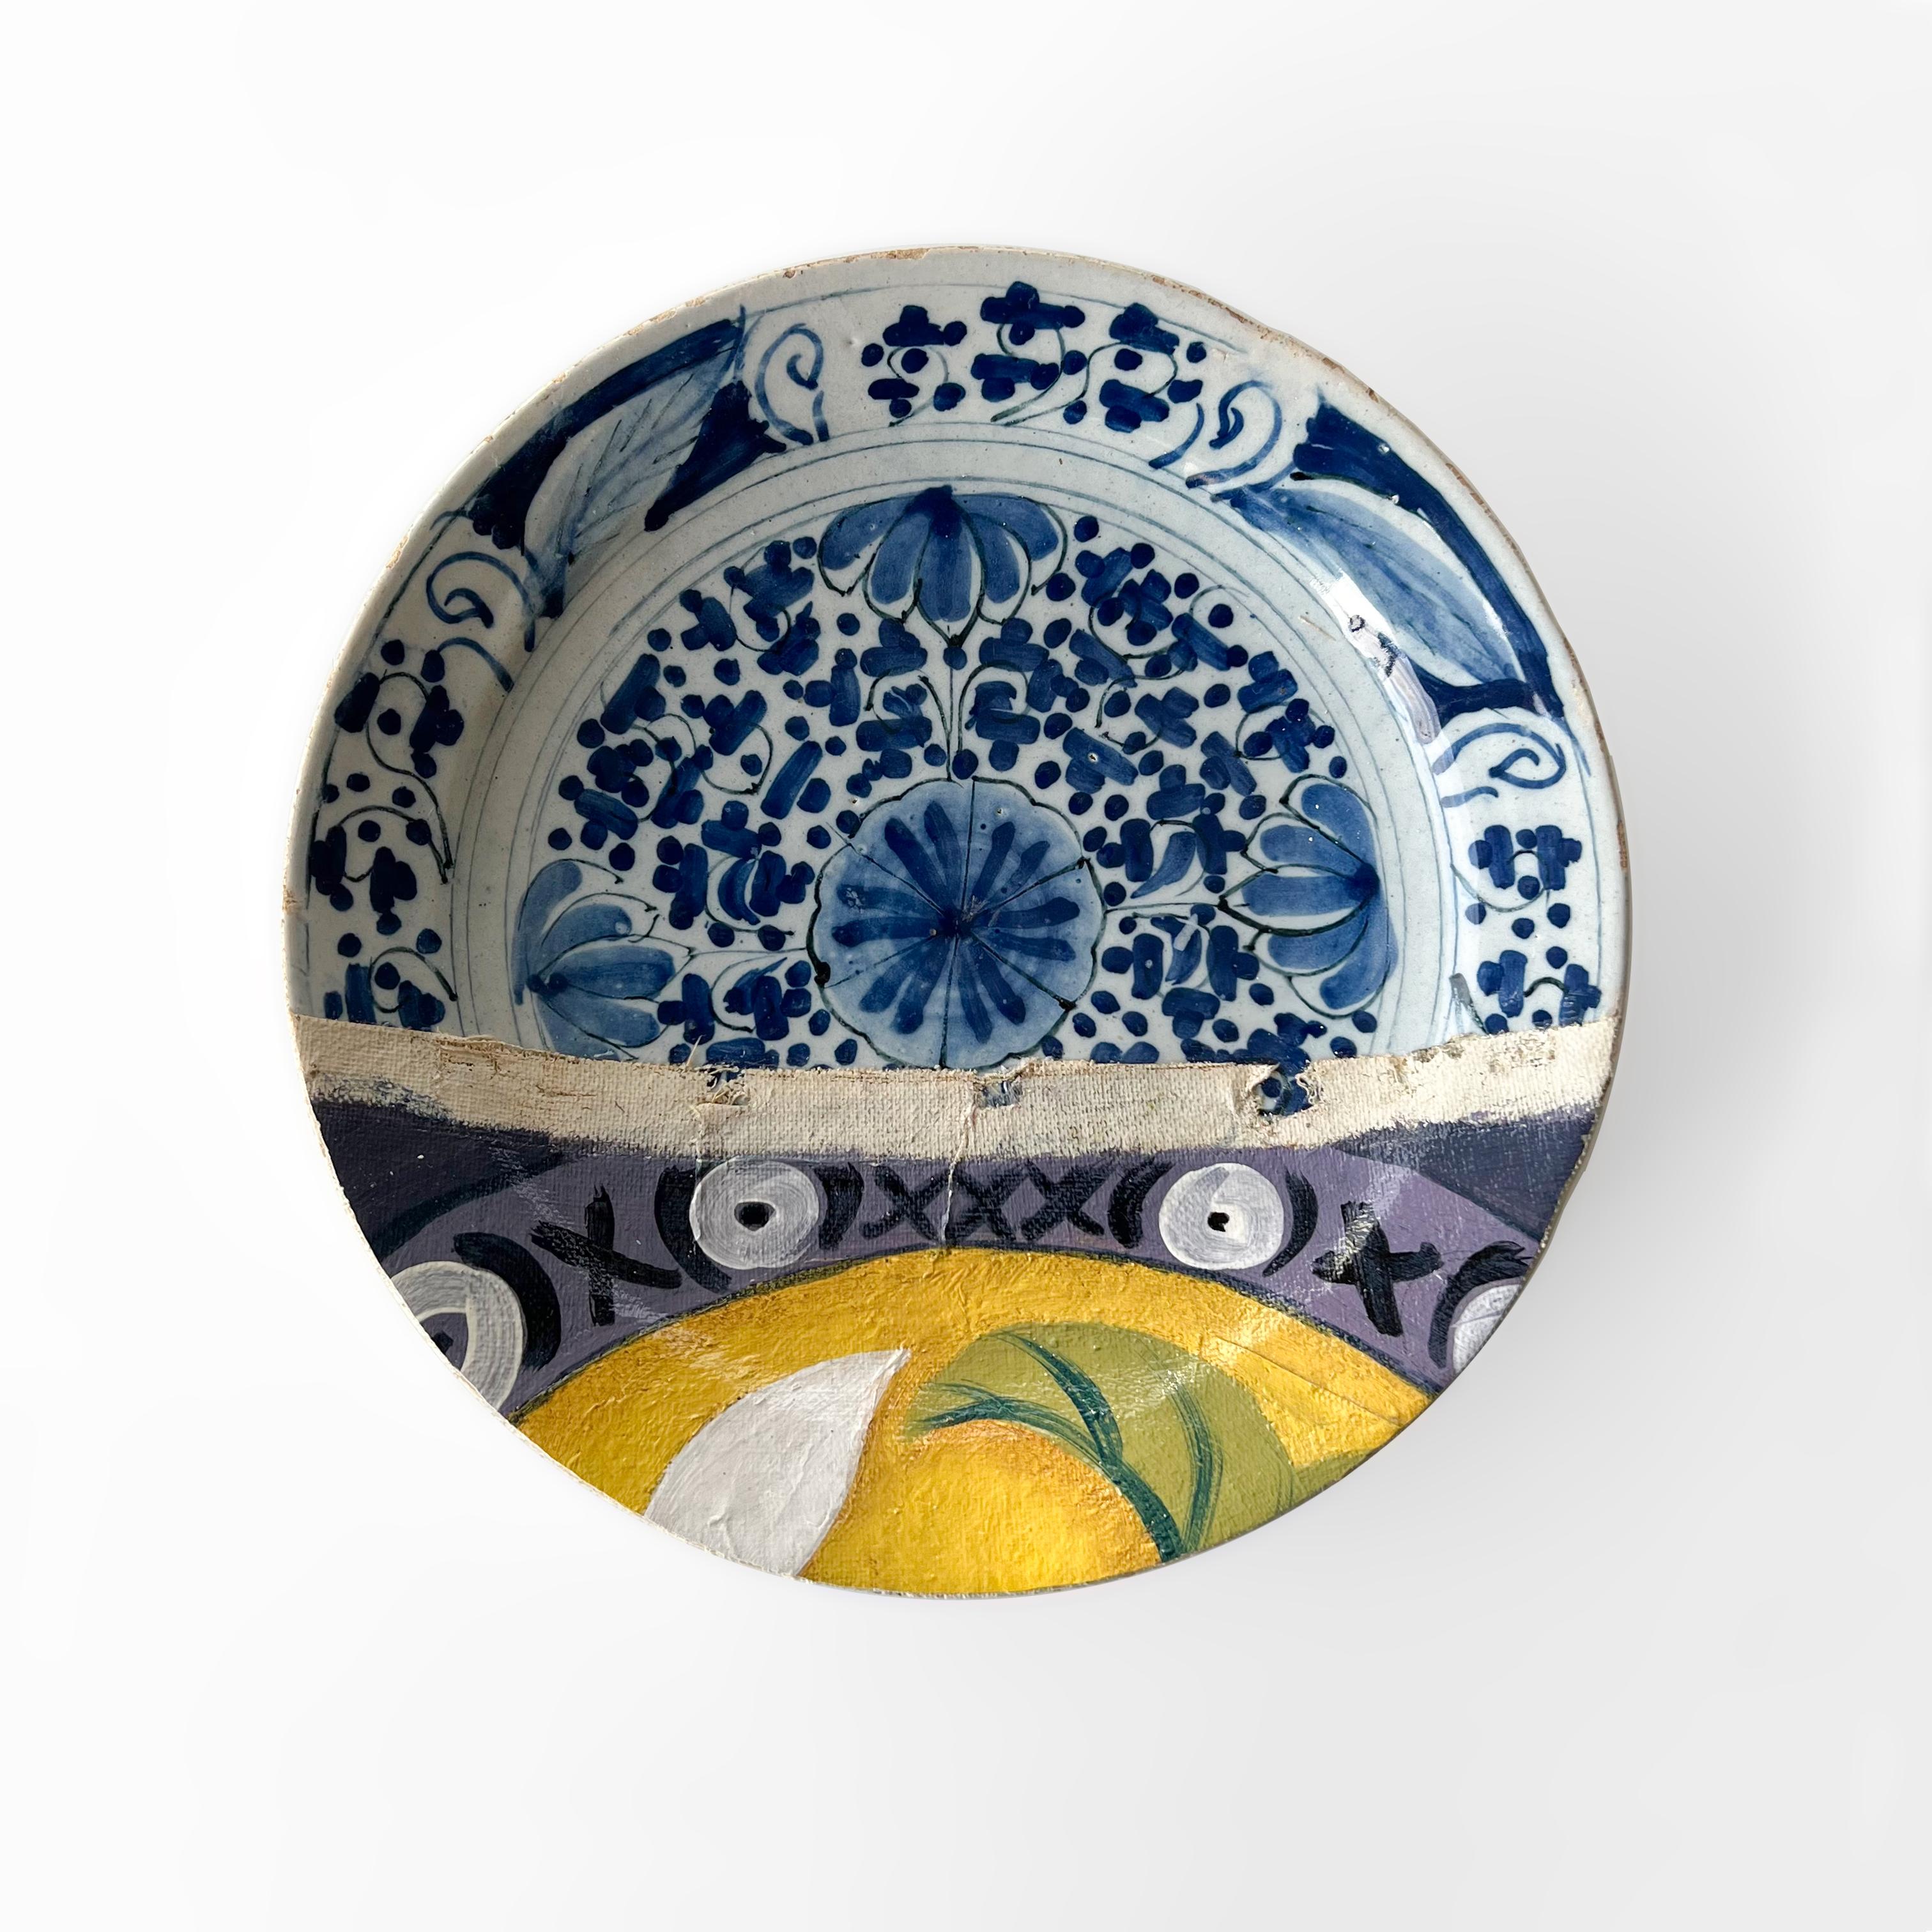 “Bloomsbury” includes several hand painted Blue & White plates, among which a rare 18th C. plate with a peony motif from De Lampetkan pottery (1609-1811) in Delft; a 20th C. plate with Peacock Feather motif; a Delfts Blue plate from the Porceleyne